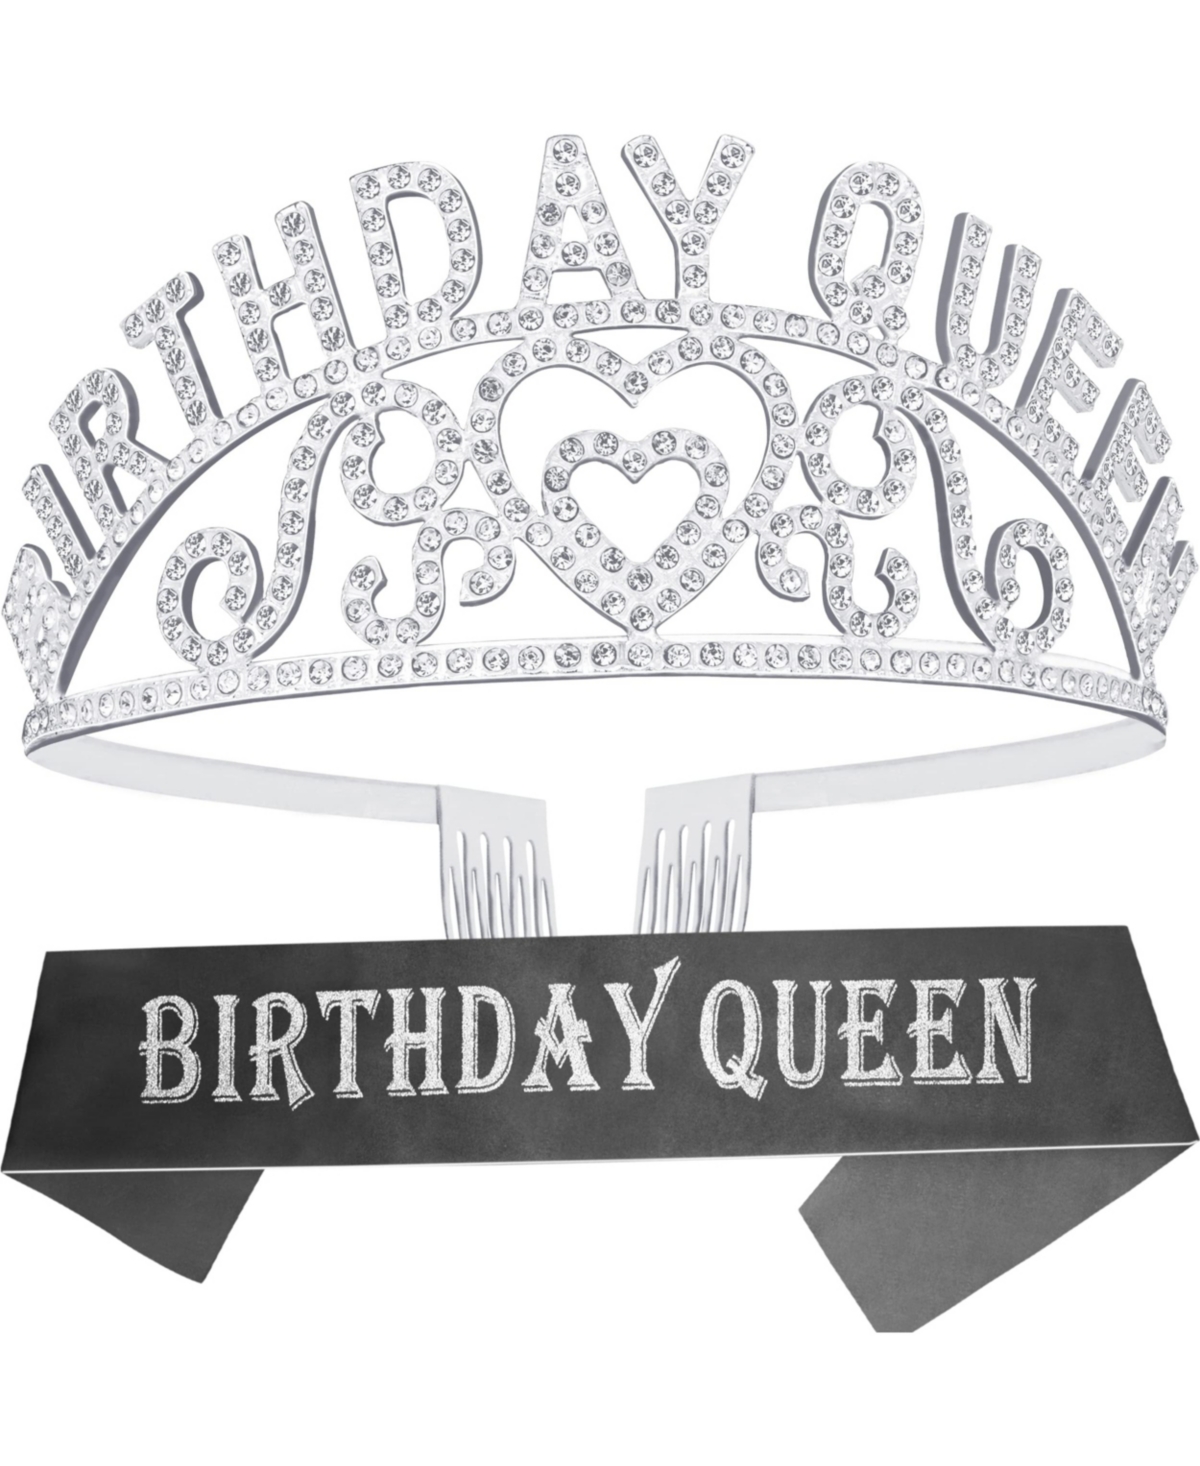 Birthday Decorations Set with Queen Sash, Tiara, Girl Headband, and Accessories for 13th, 16th, 21st, 30th, 35th Celebrations - Happy Birthday Party S